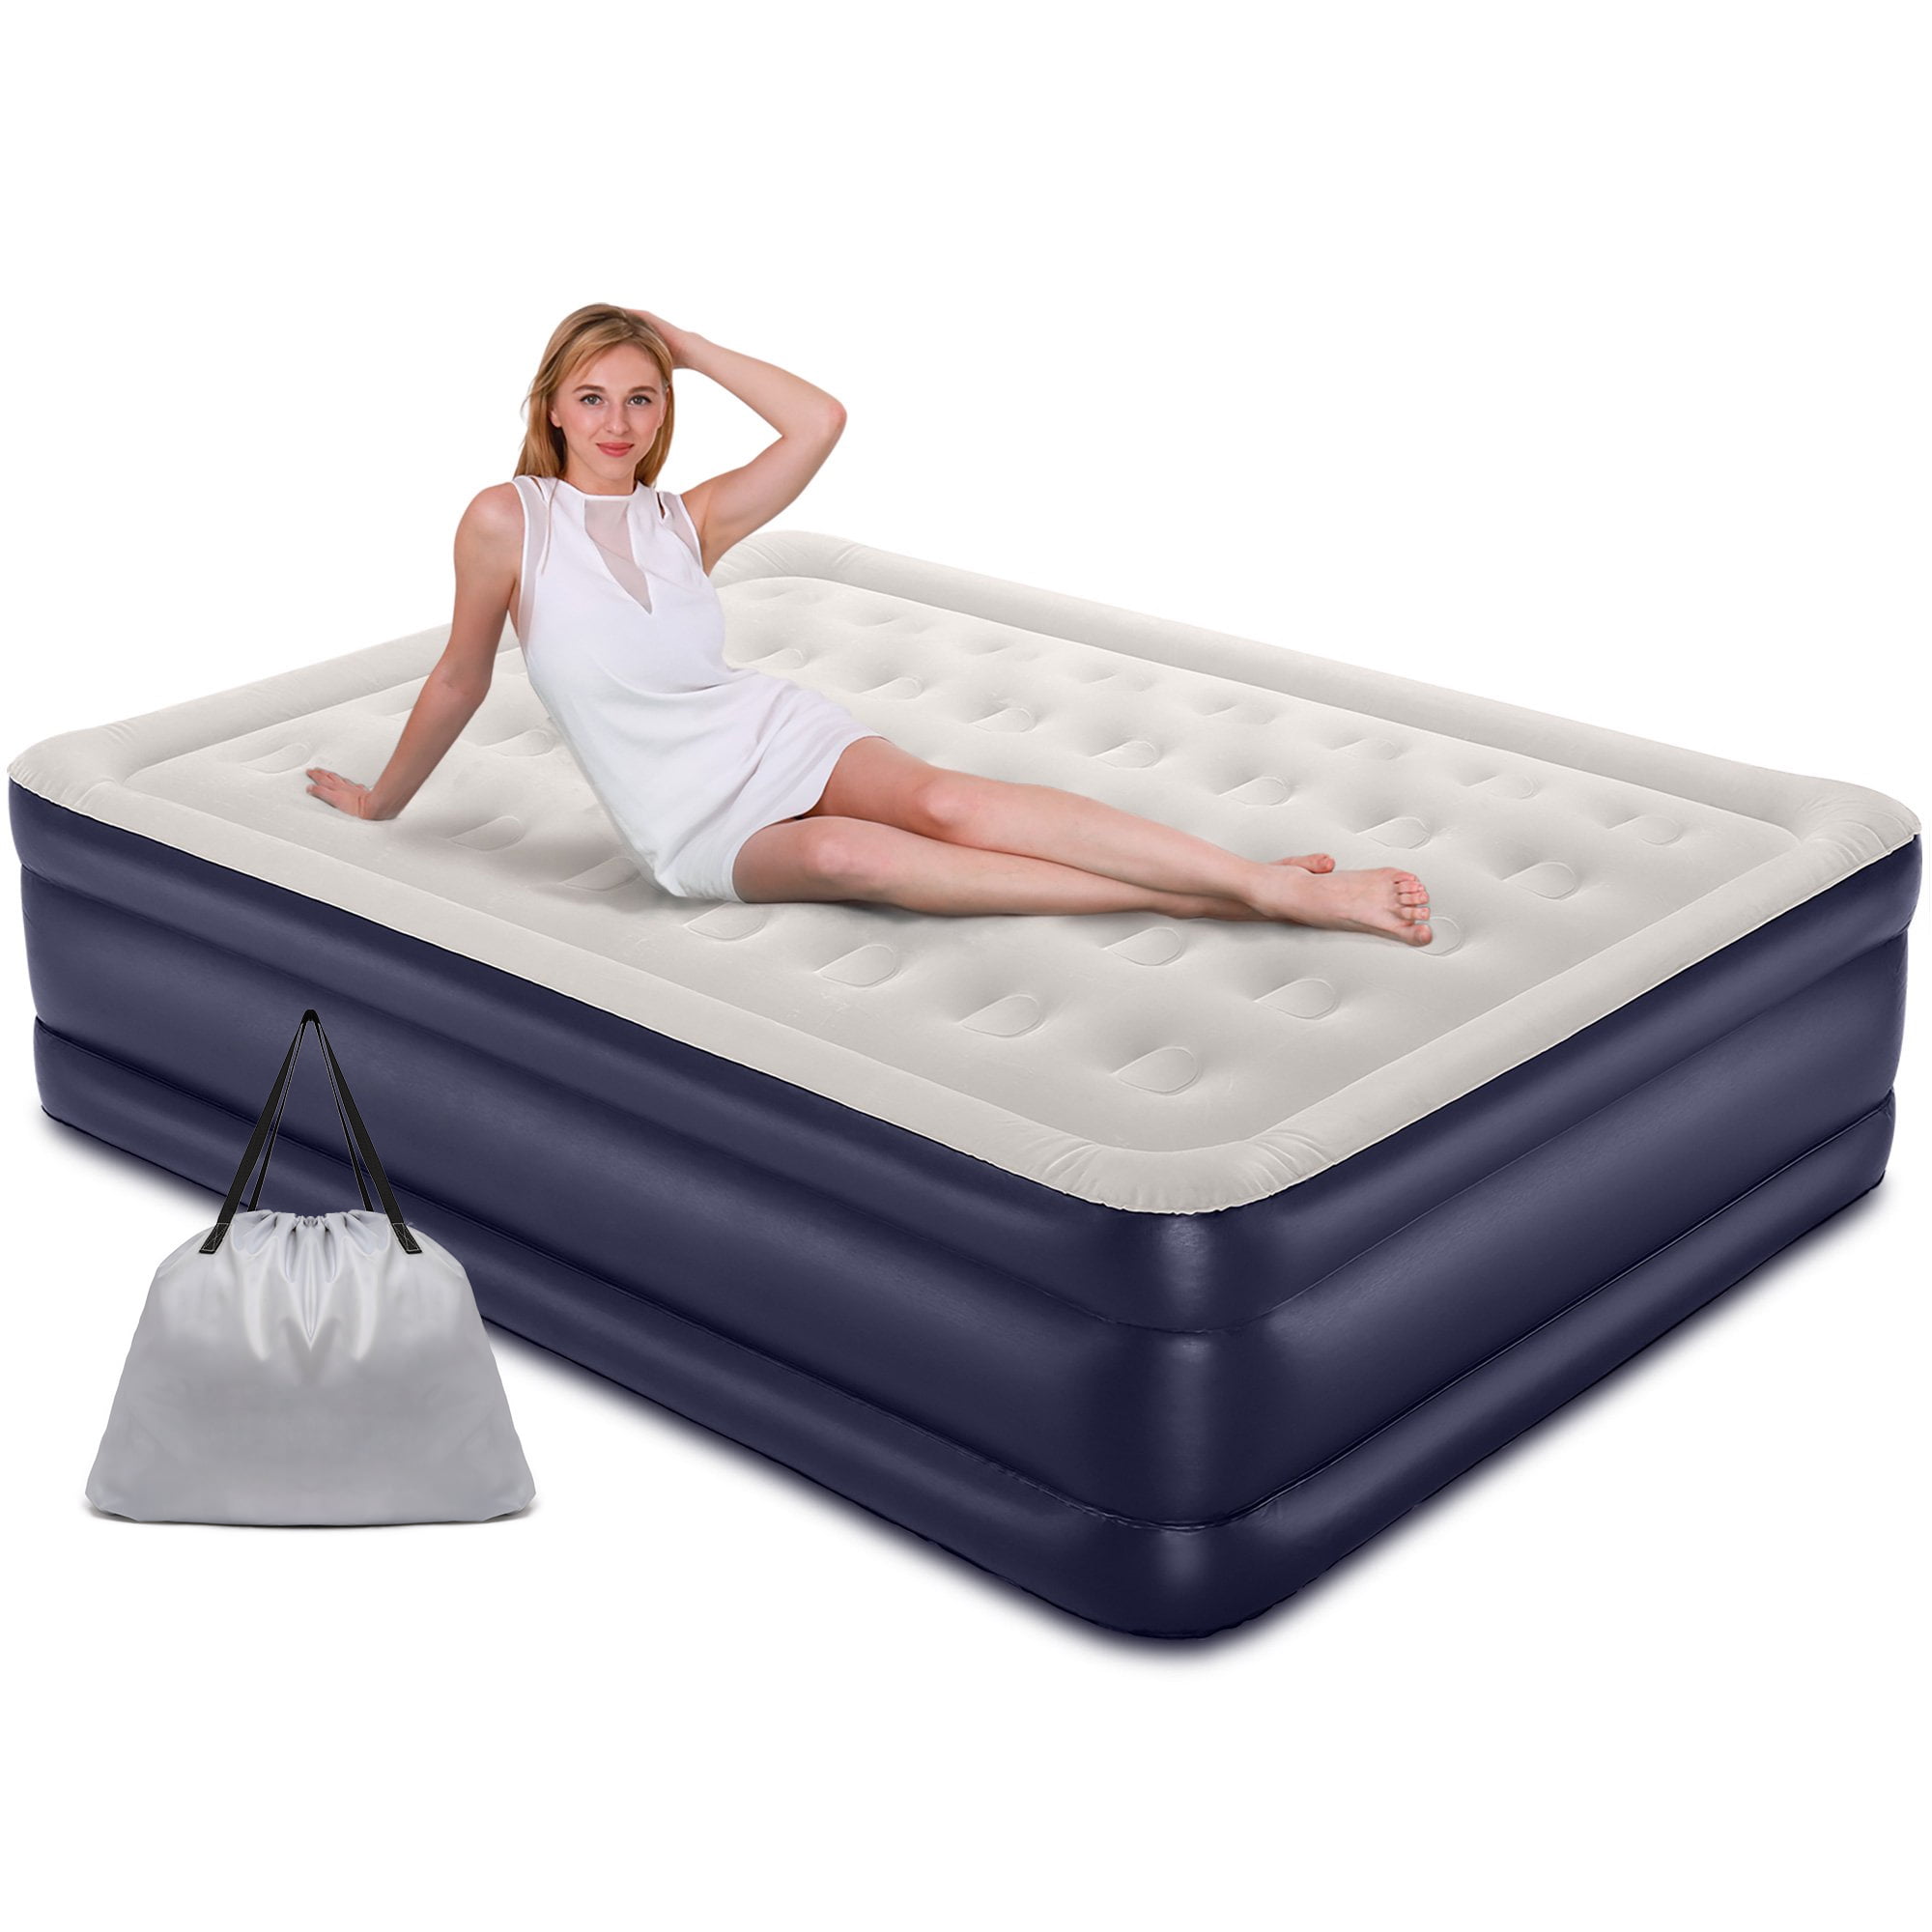 Queen Size Comfort Air Bed Mattress with Built-In Electric Pump Raised Guest 